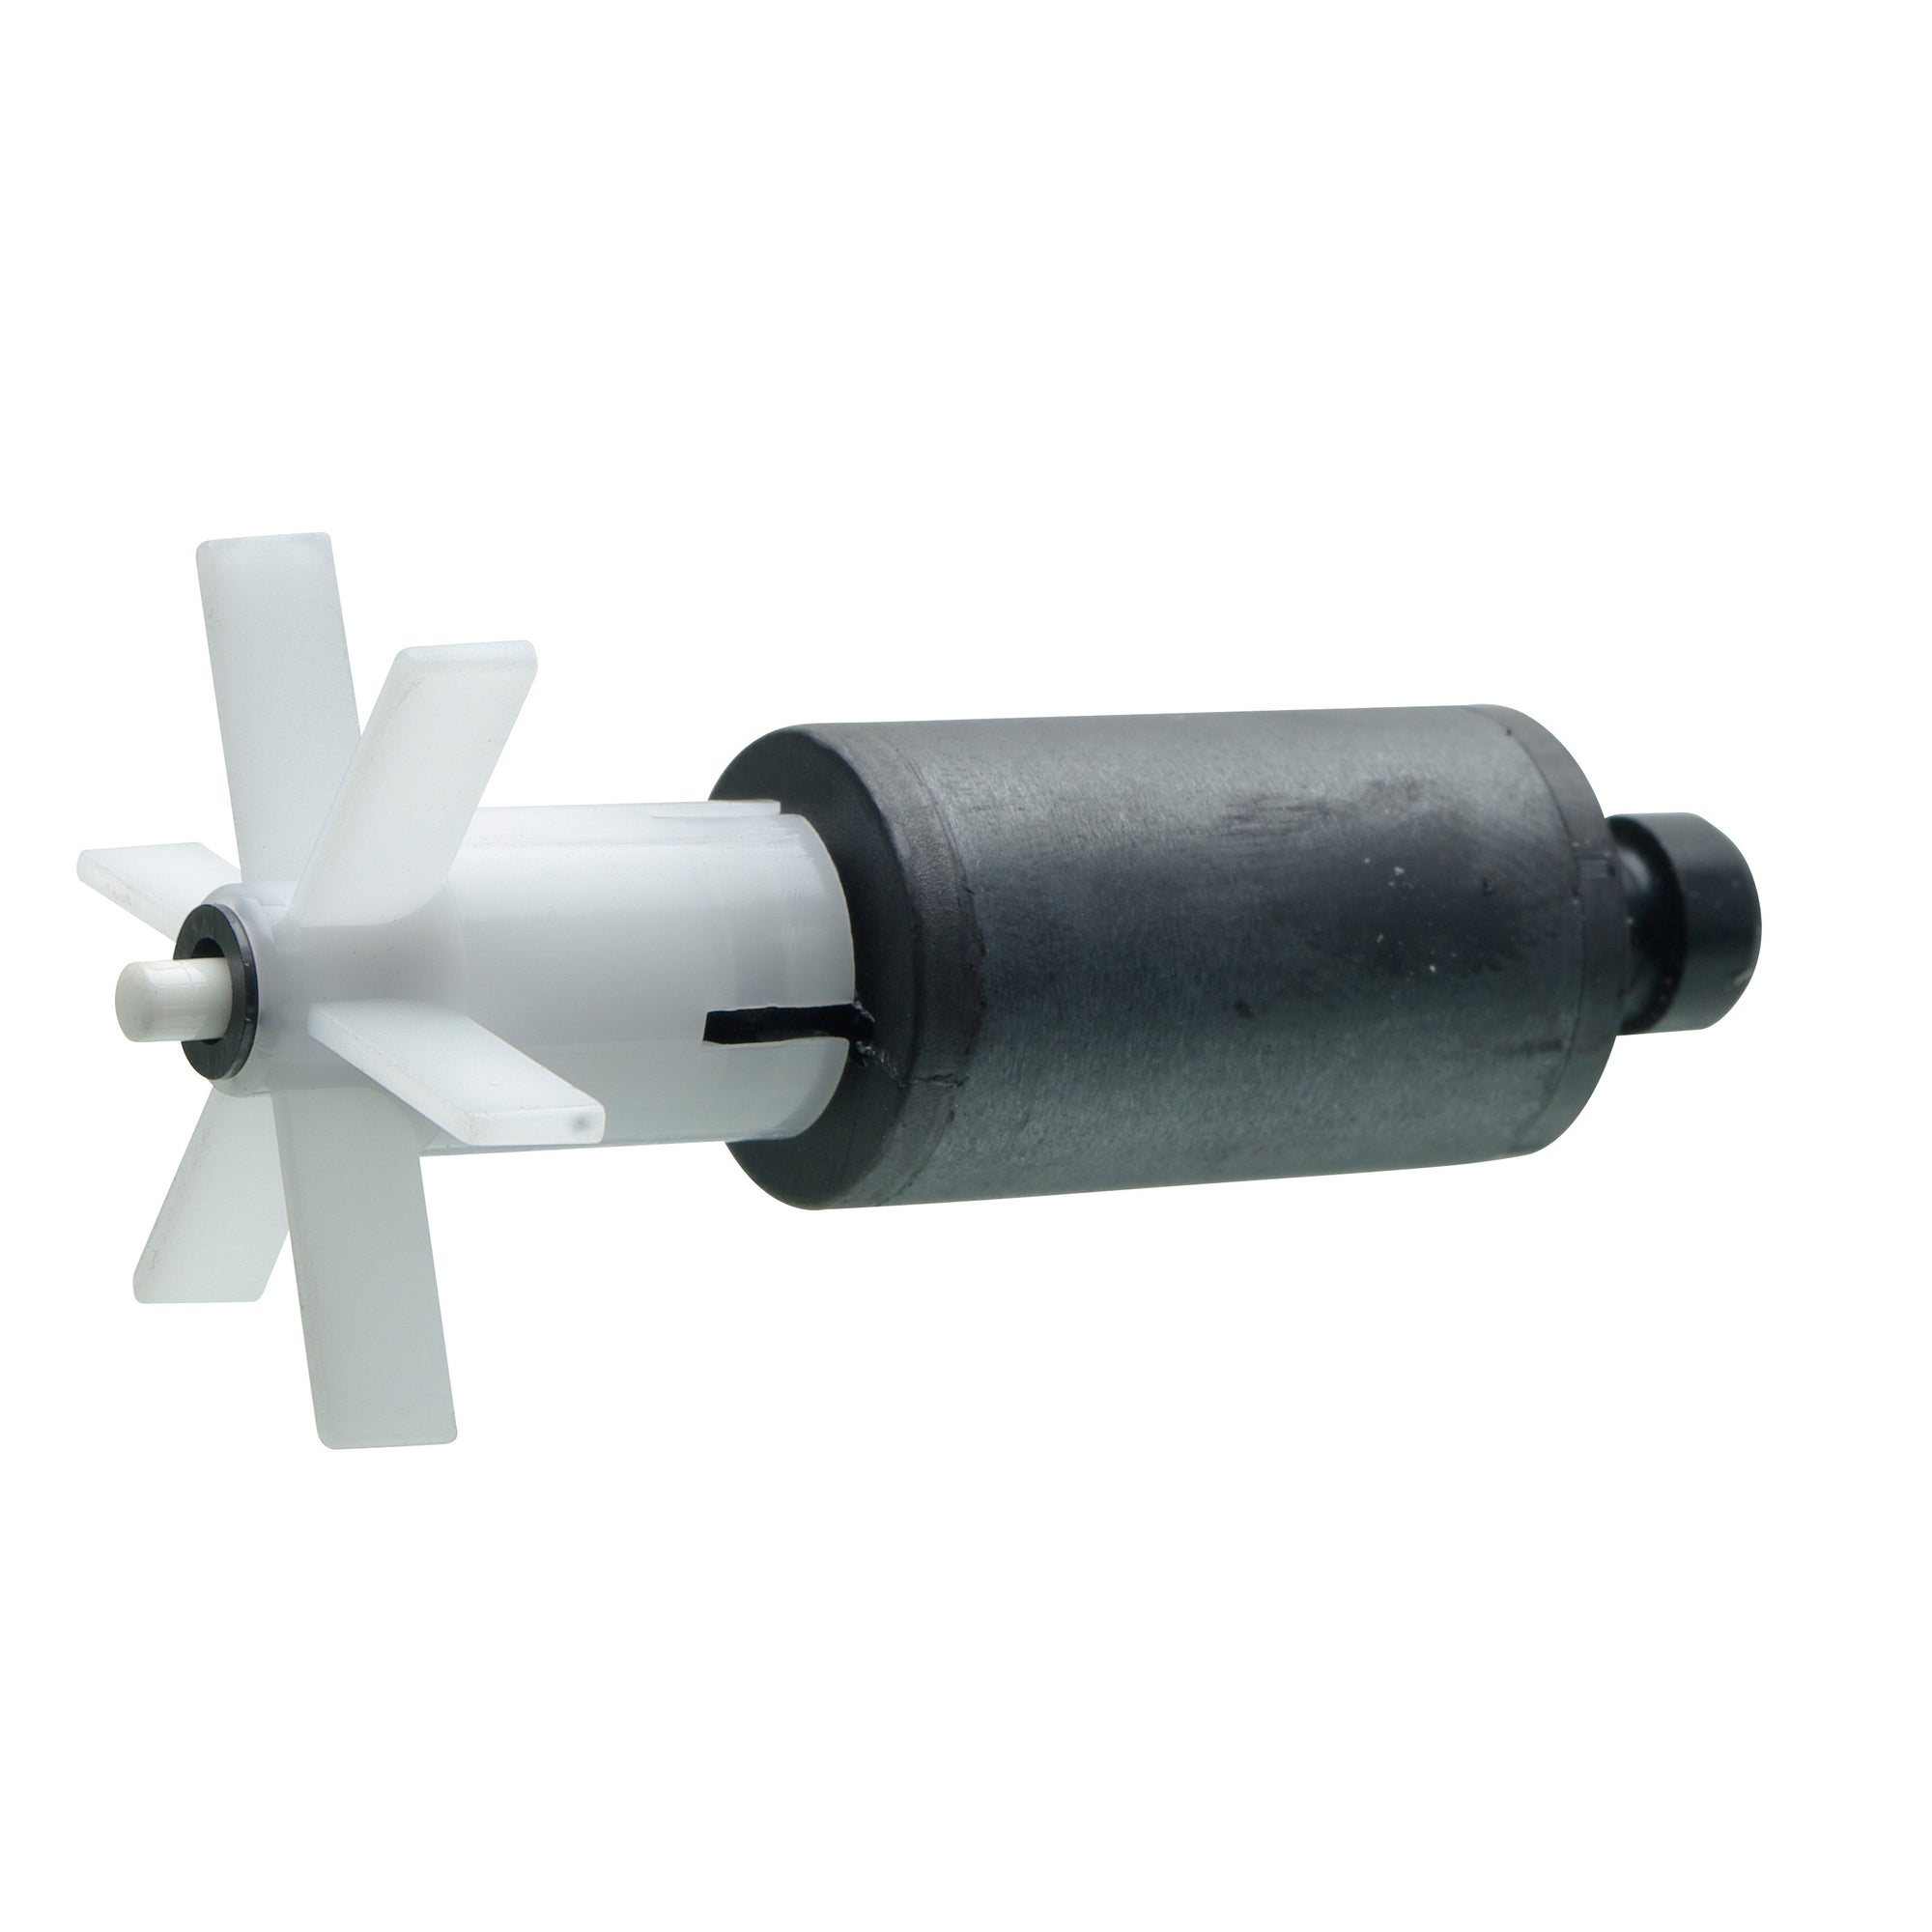 Fluval 306 Magnetic Impeller with Shaft and Rubber Bushing